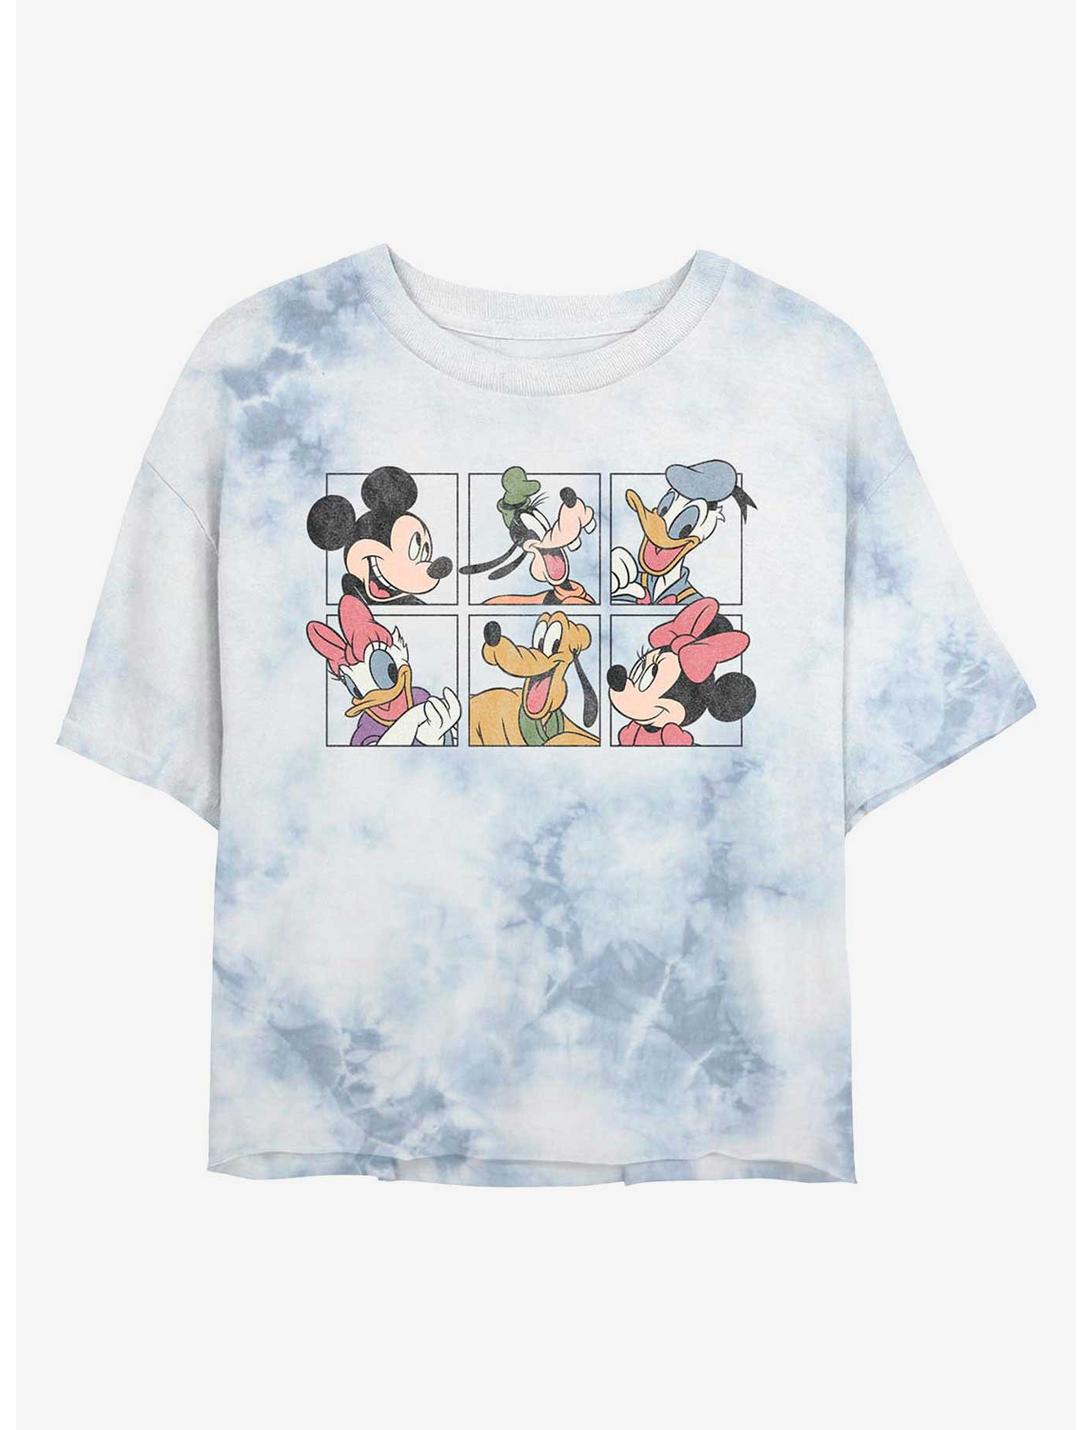 Disney Mickey Mouse And Friends Grid Womens Tie-Dye Crop T-Shirt, WHITEBLUE, hi-res